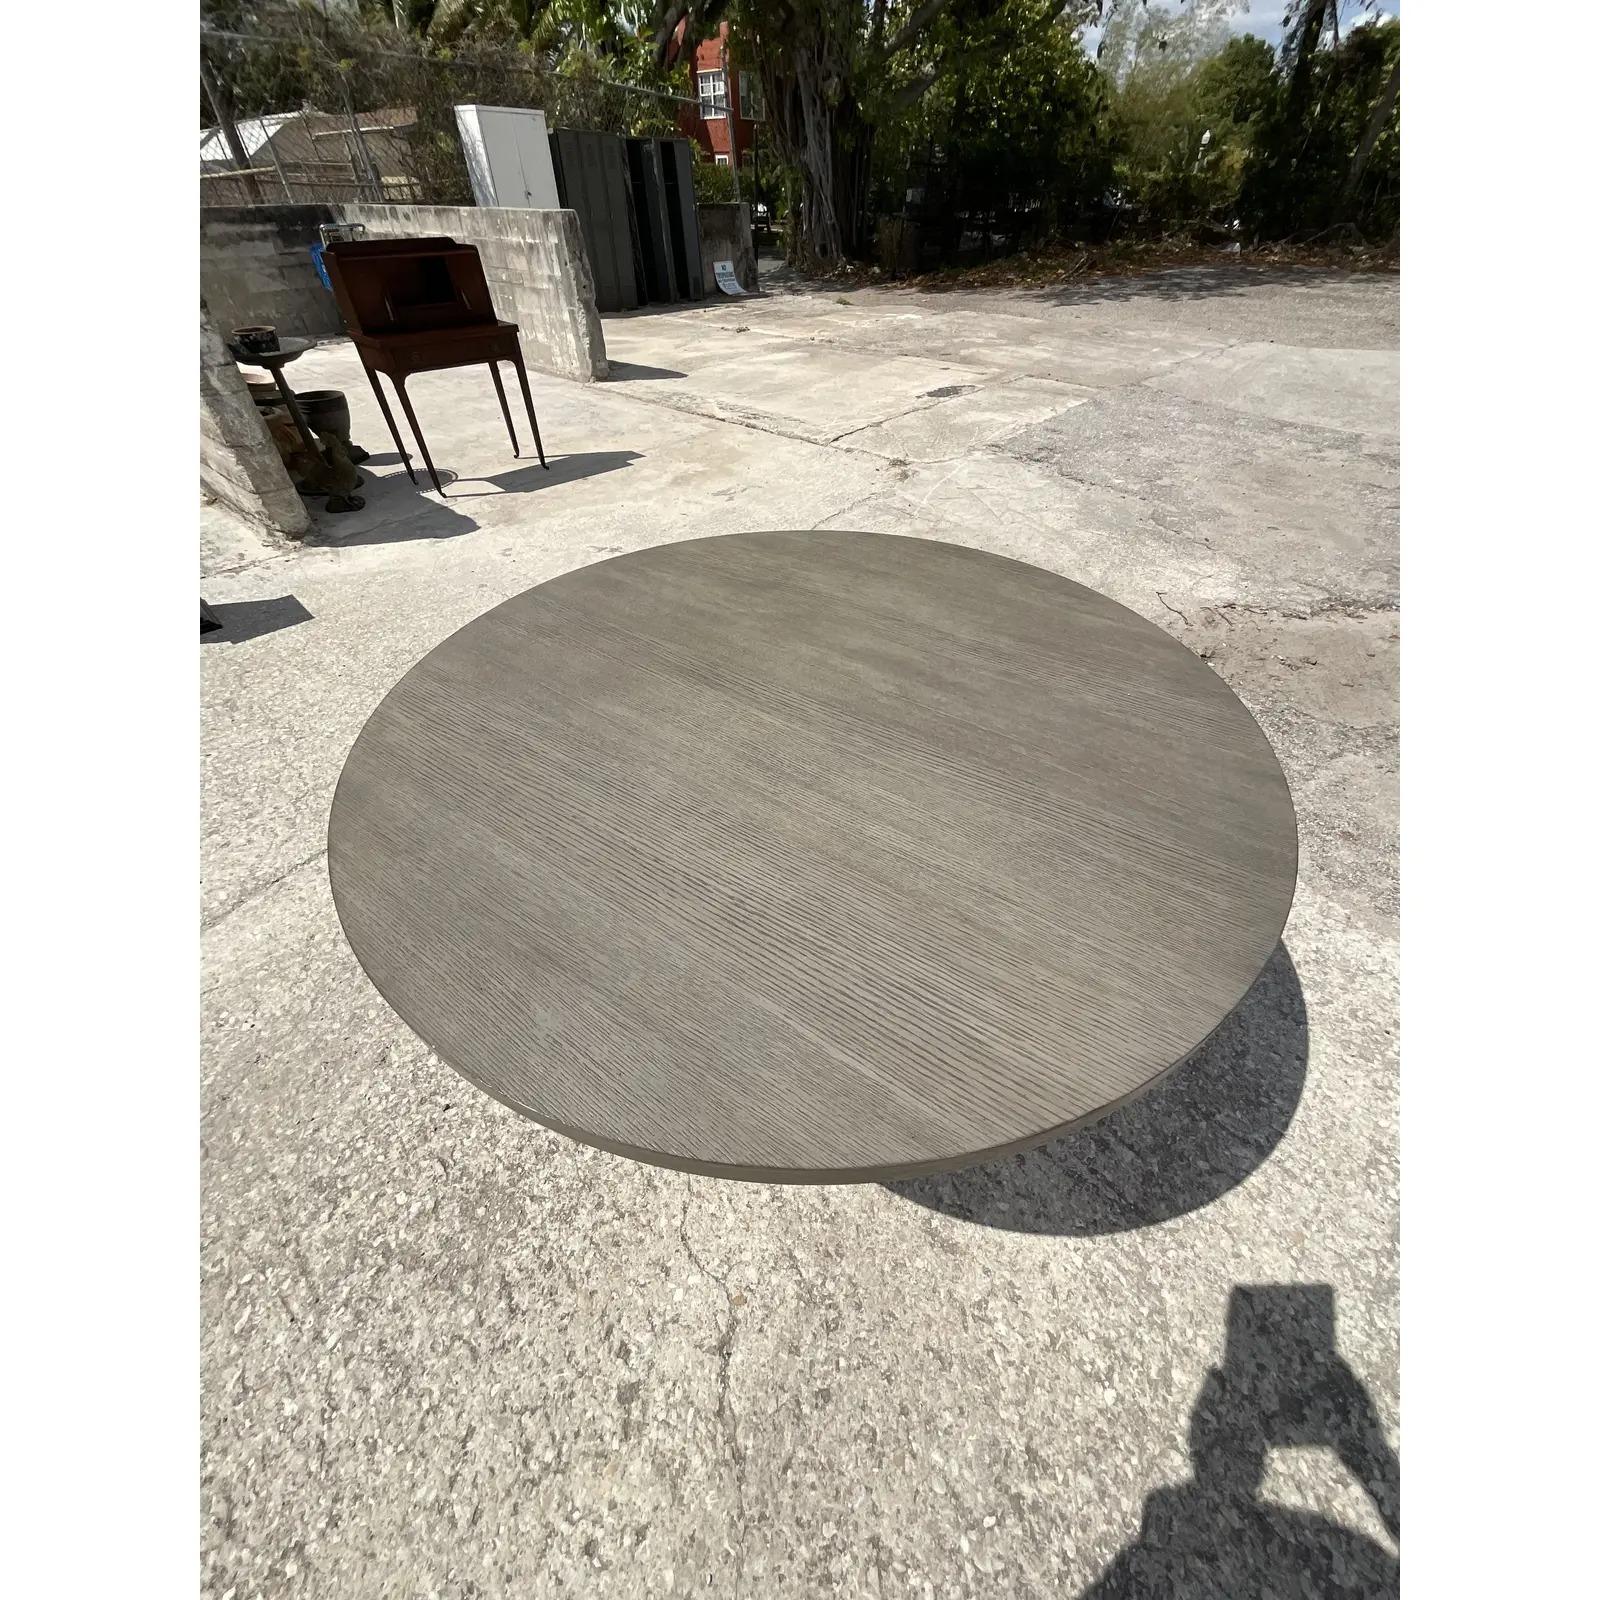 Fantastic vintage Bernhardt dining table. Beautiful Contemporary design with a matte white oak wood top and a sleek modern cast pedestal. A real chameleon that works beautiful with so many decors. Acquired from a Palm Beach estate.